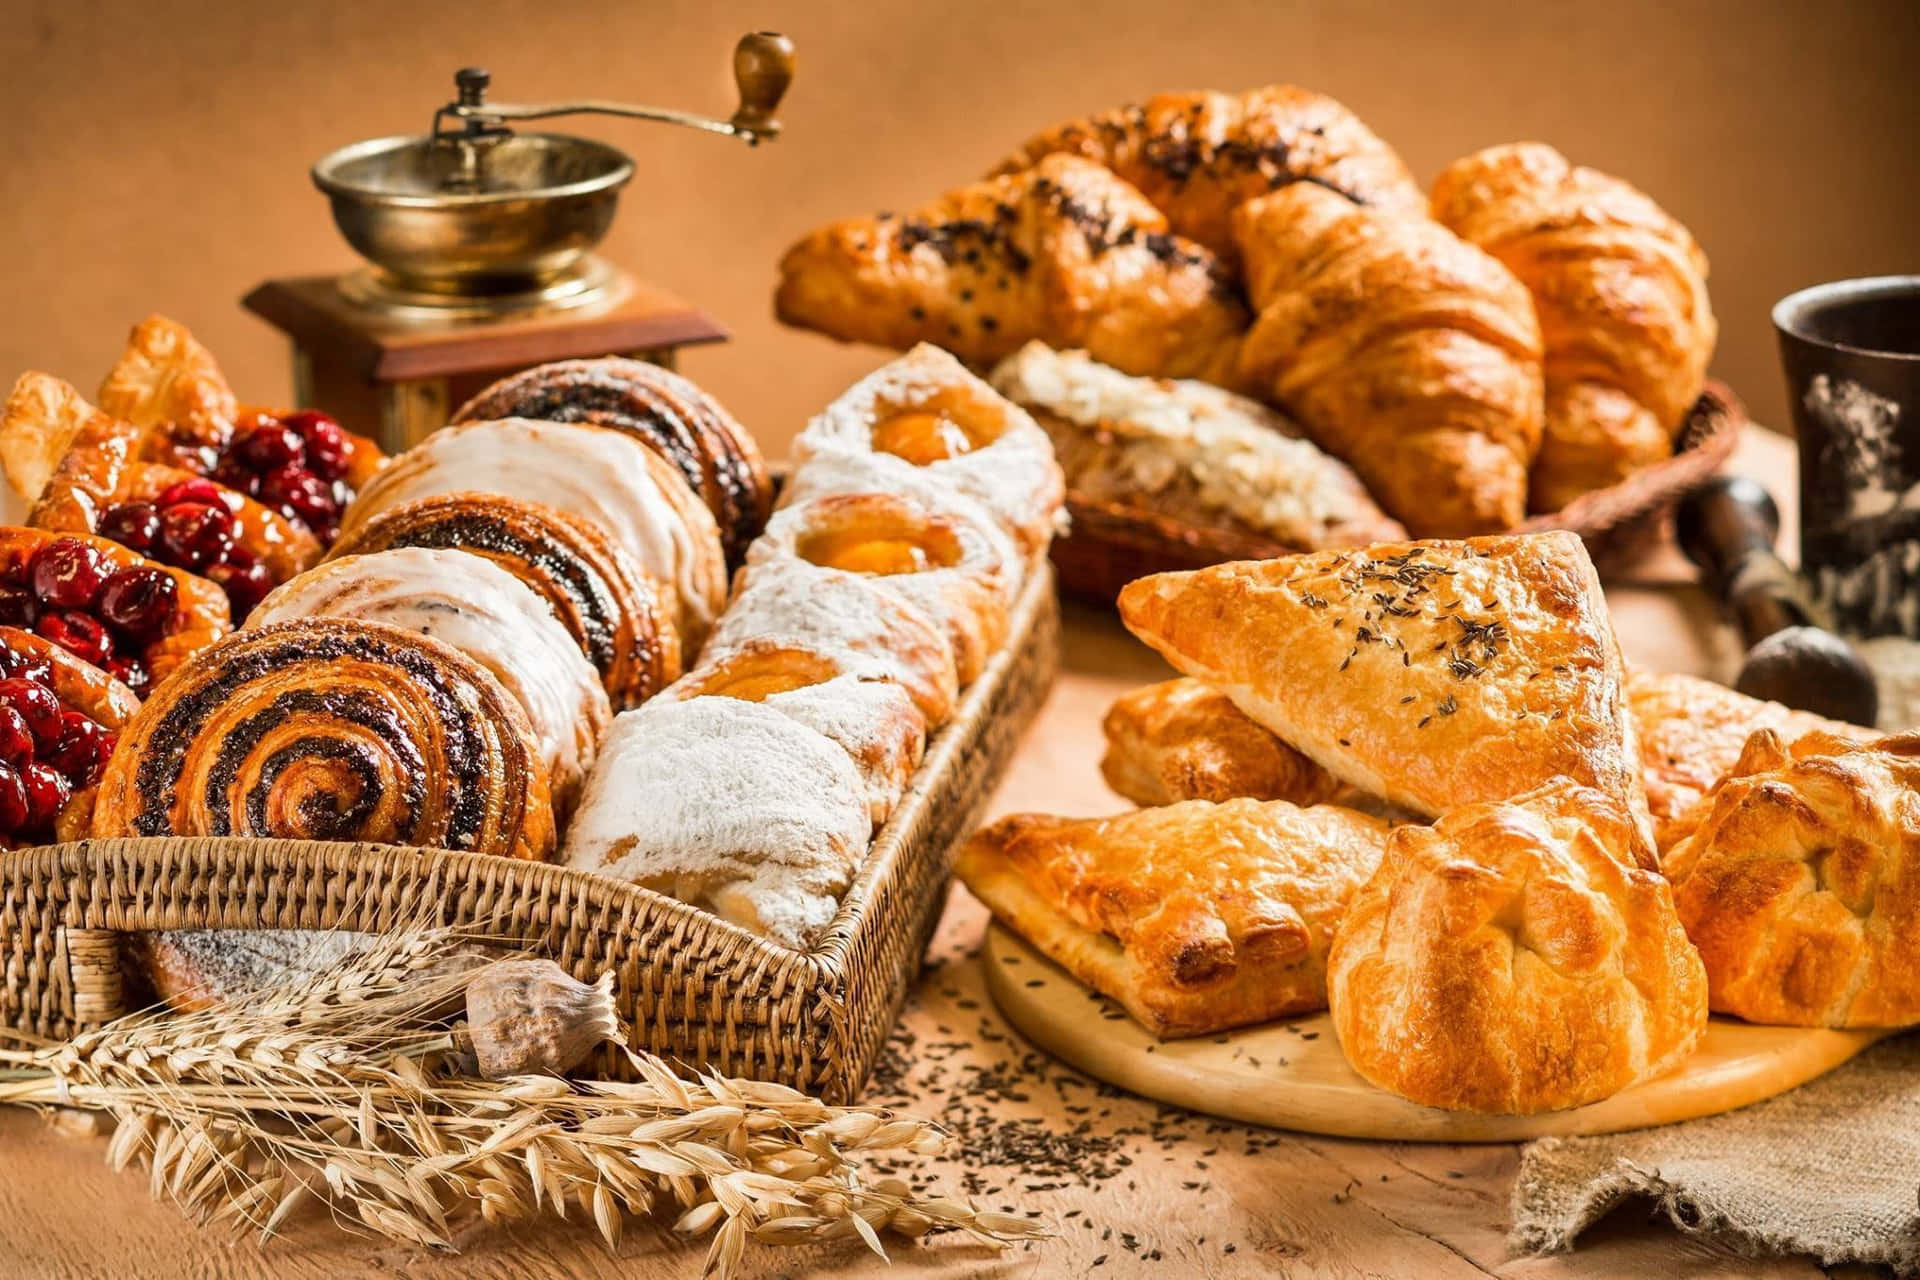 An appetizing assortment of pastries fresh from the bakery.